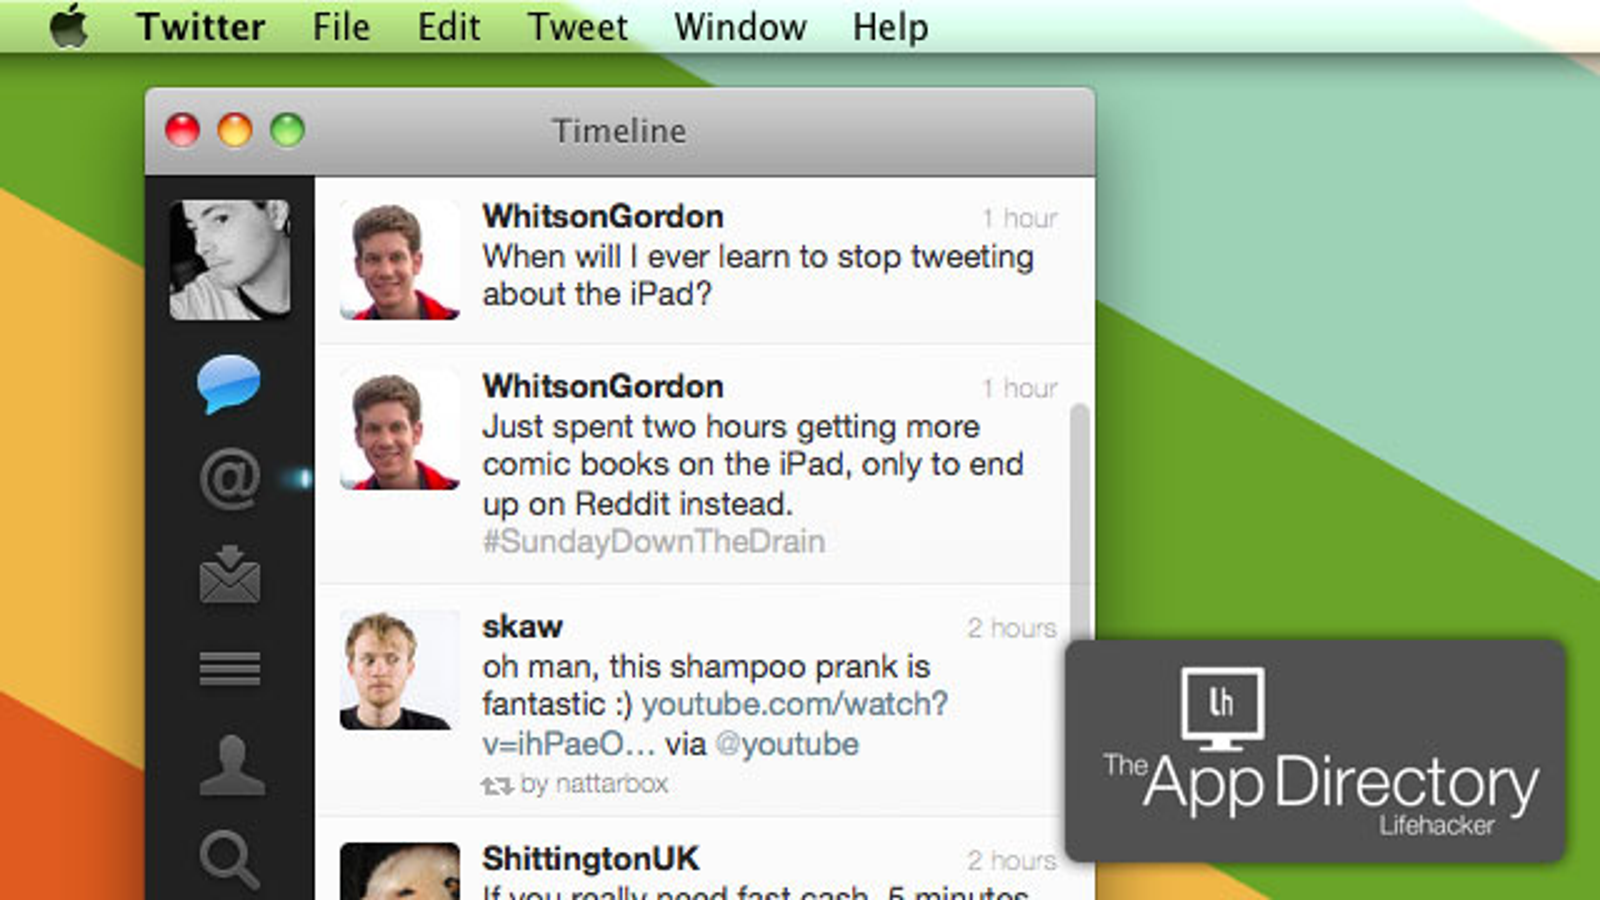 twitter client for mac